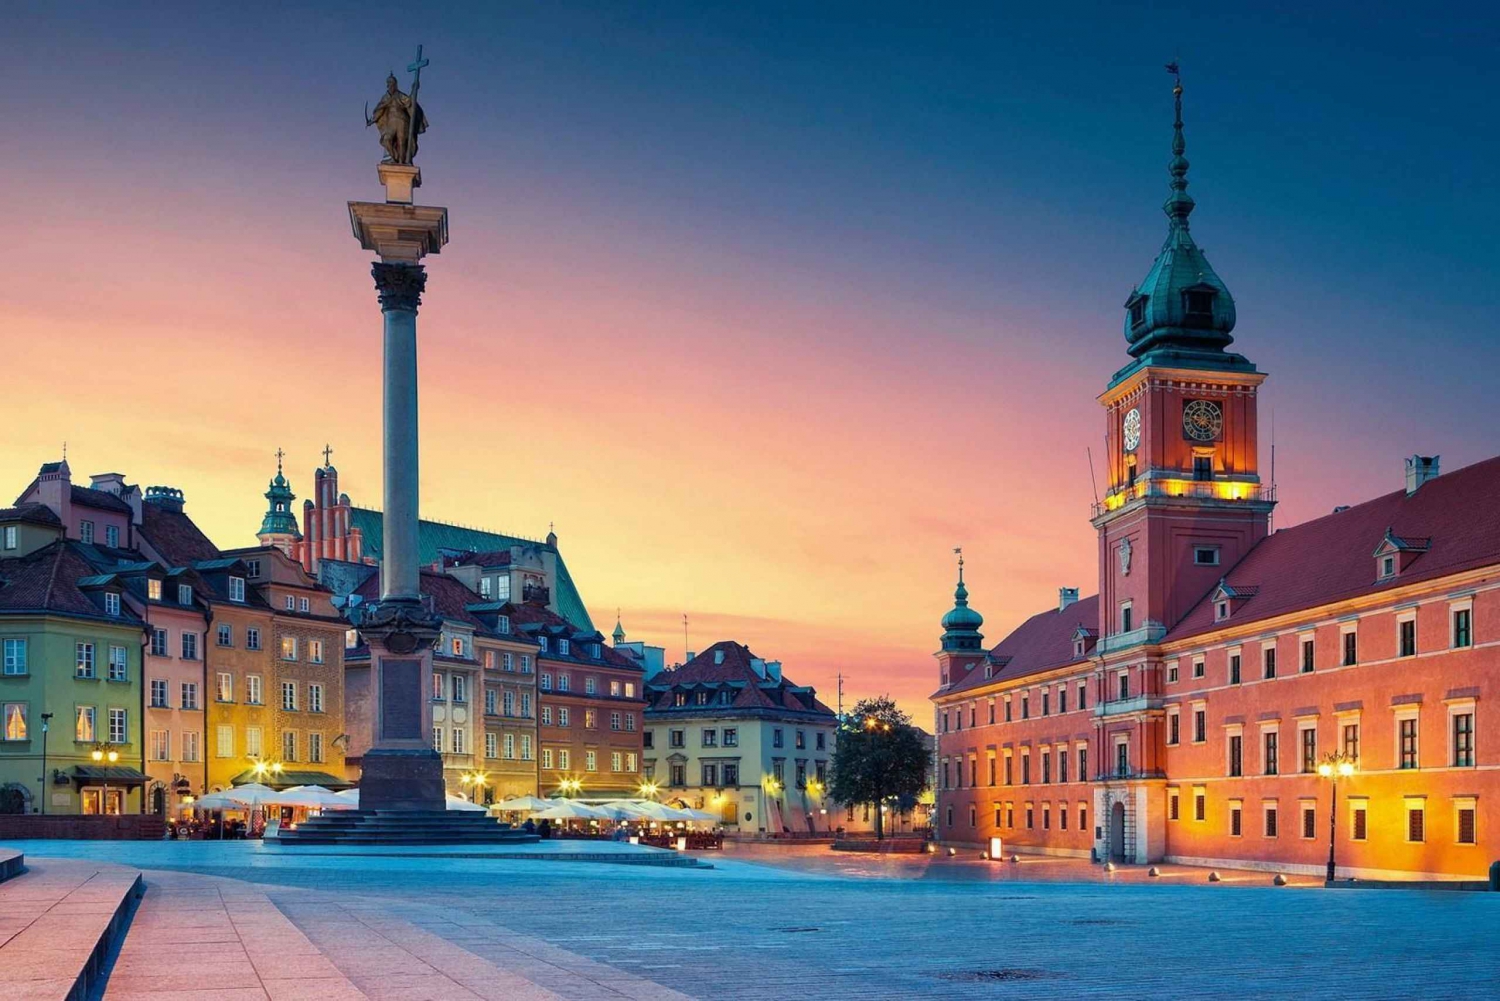 Warsaw: Old Town, Royal Castle & Palace of Culture & Science